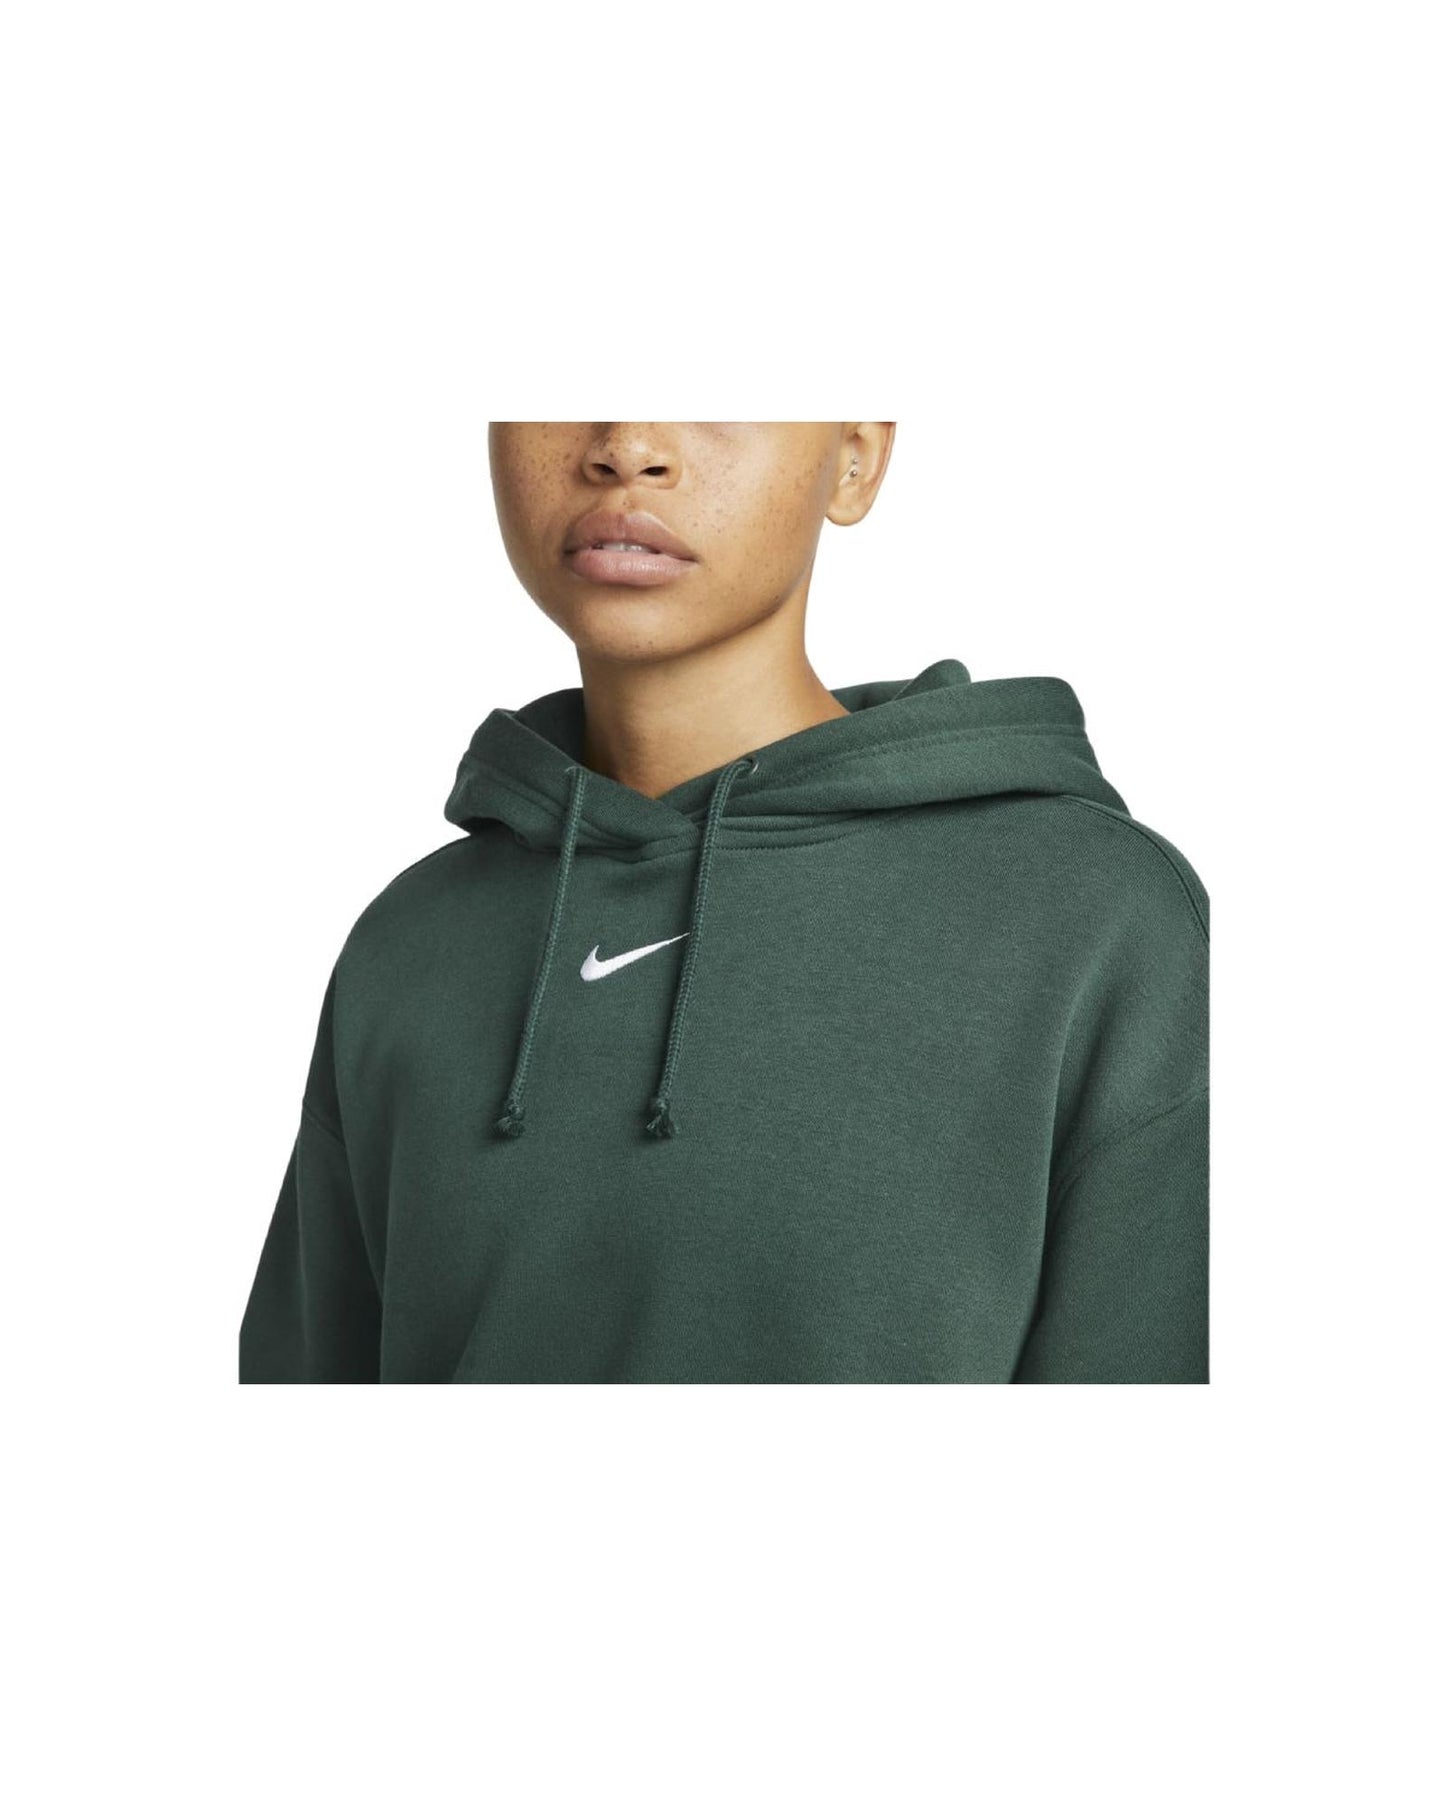 Oversized Fleece Hoodie with Embroidered Swoosh Design - M